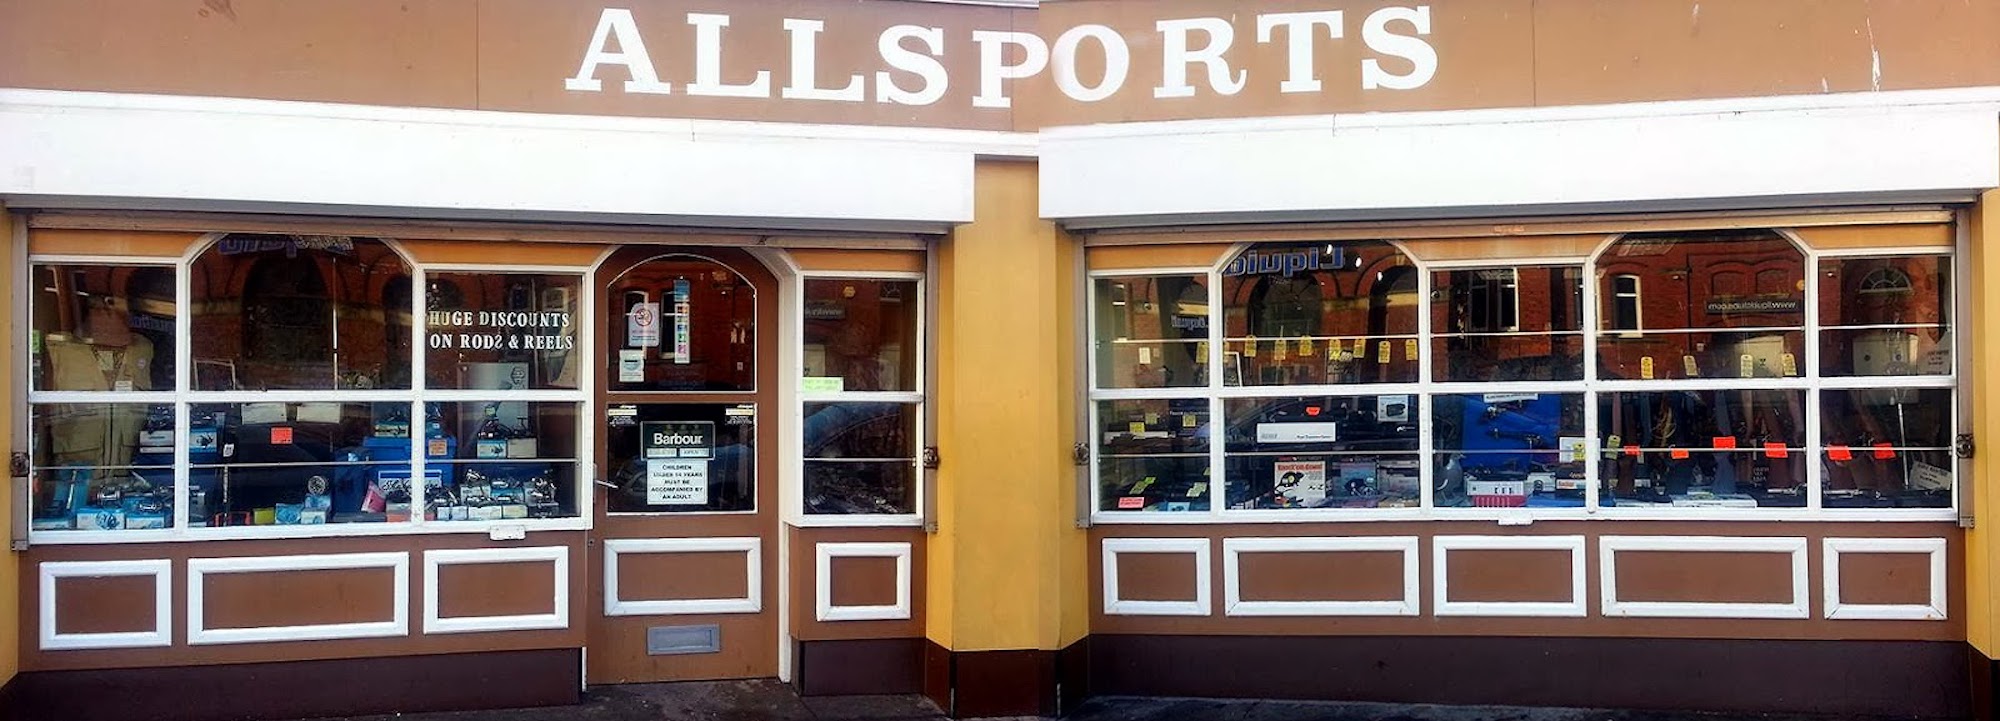 The Remaining Contents Of Allsports Gun Shop Gloucester Sold Ś35,000